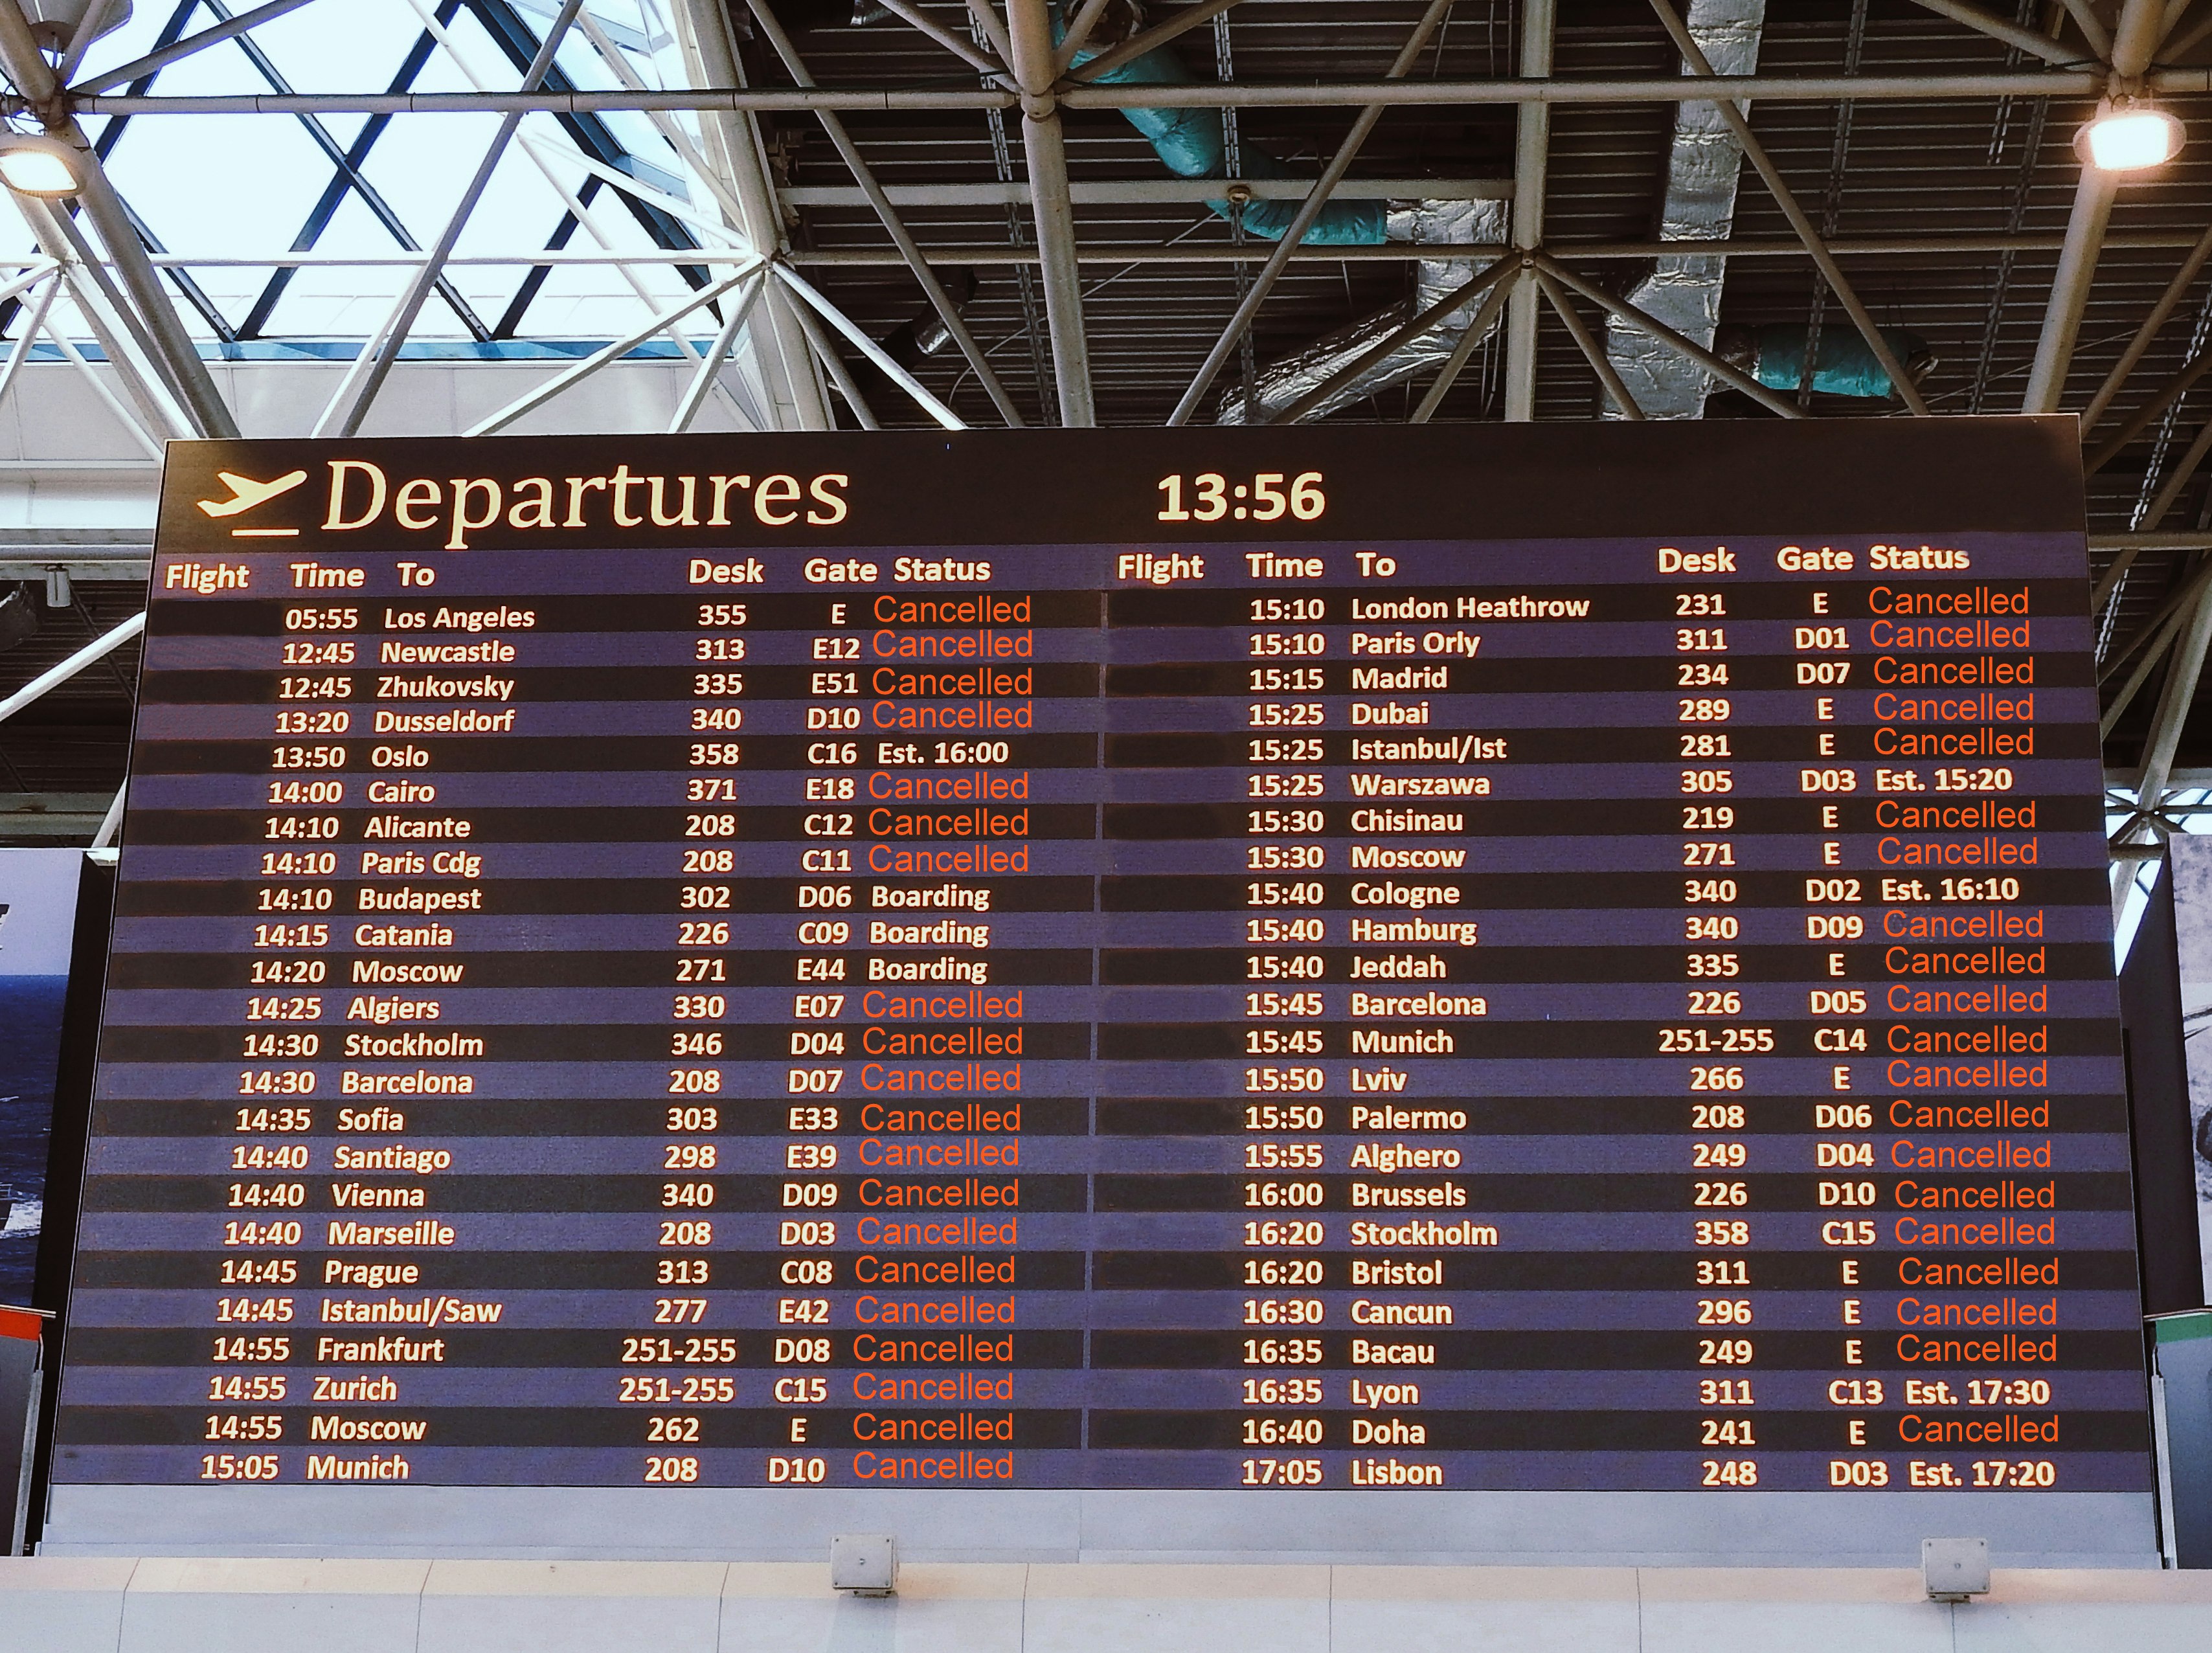 An airport display of flights, many of which are canceled.